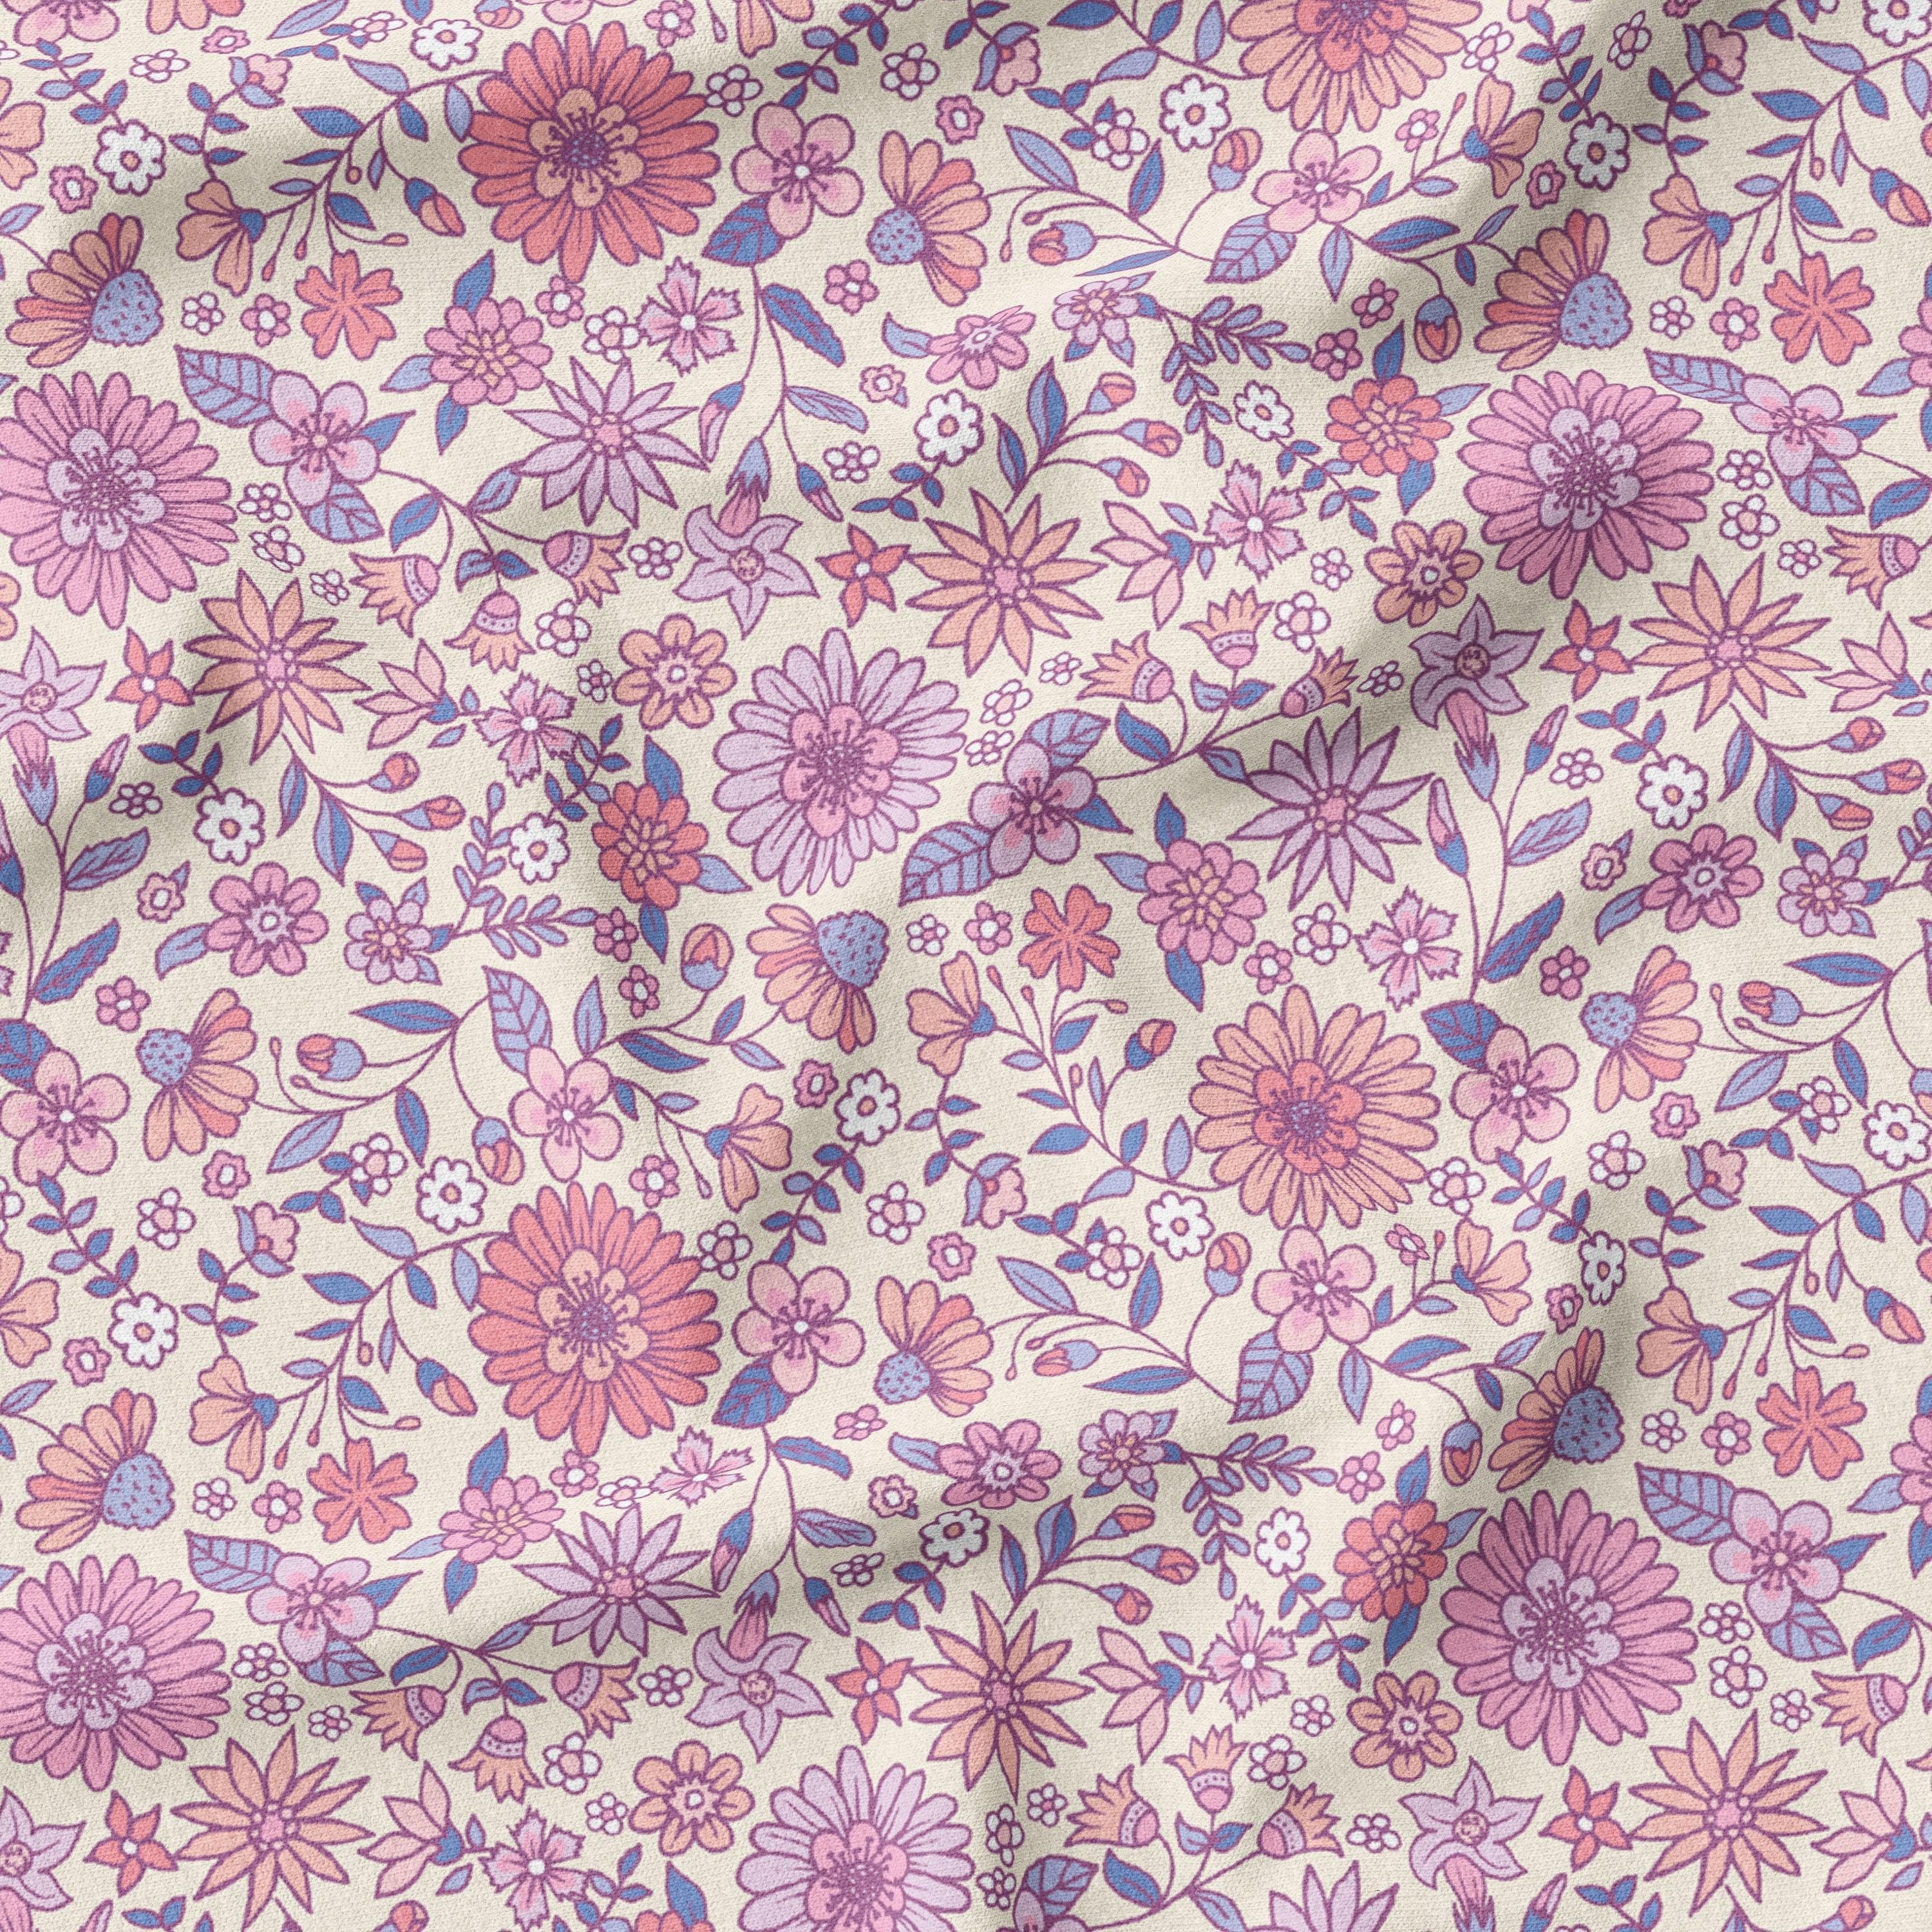 Whispering Wildflower - Boho Floral Fabric